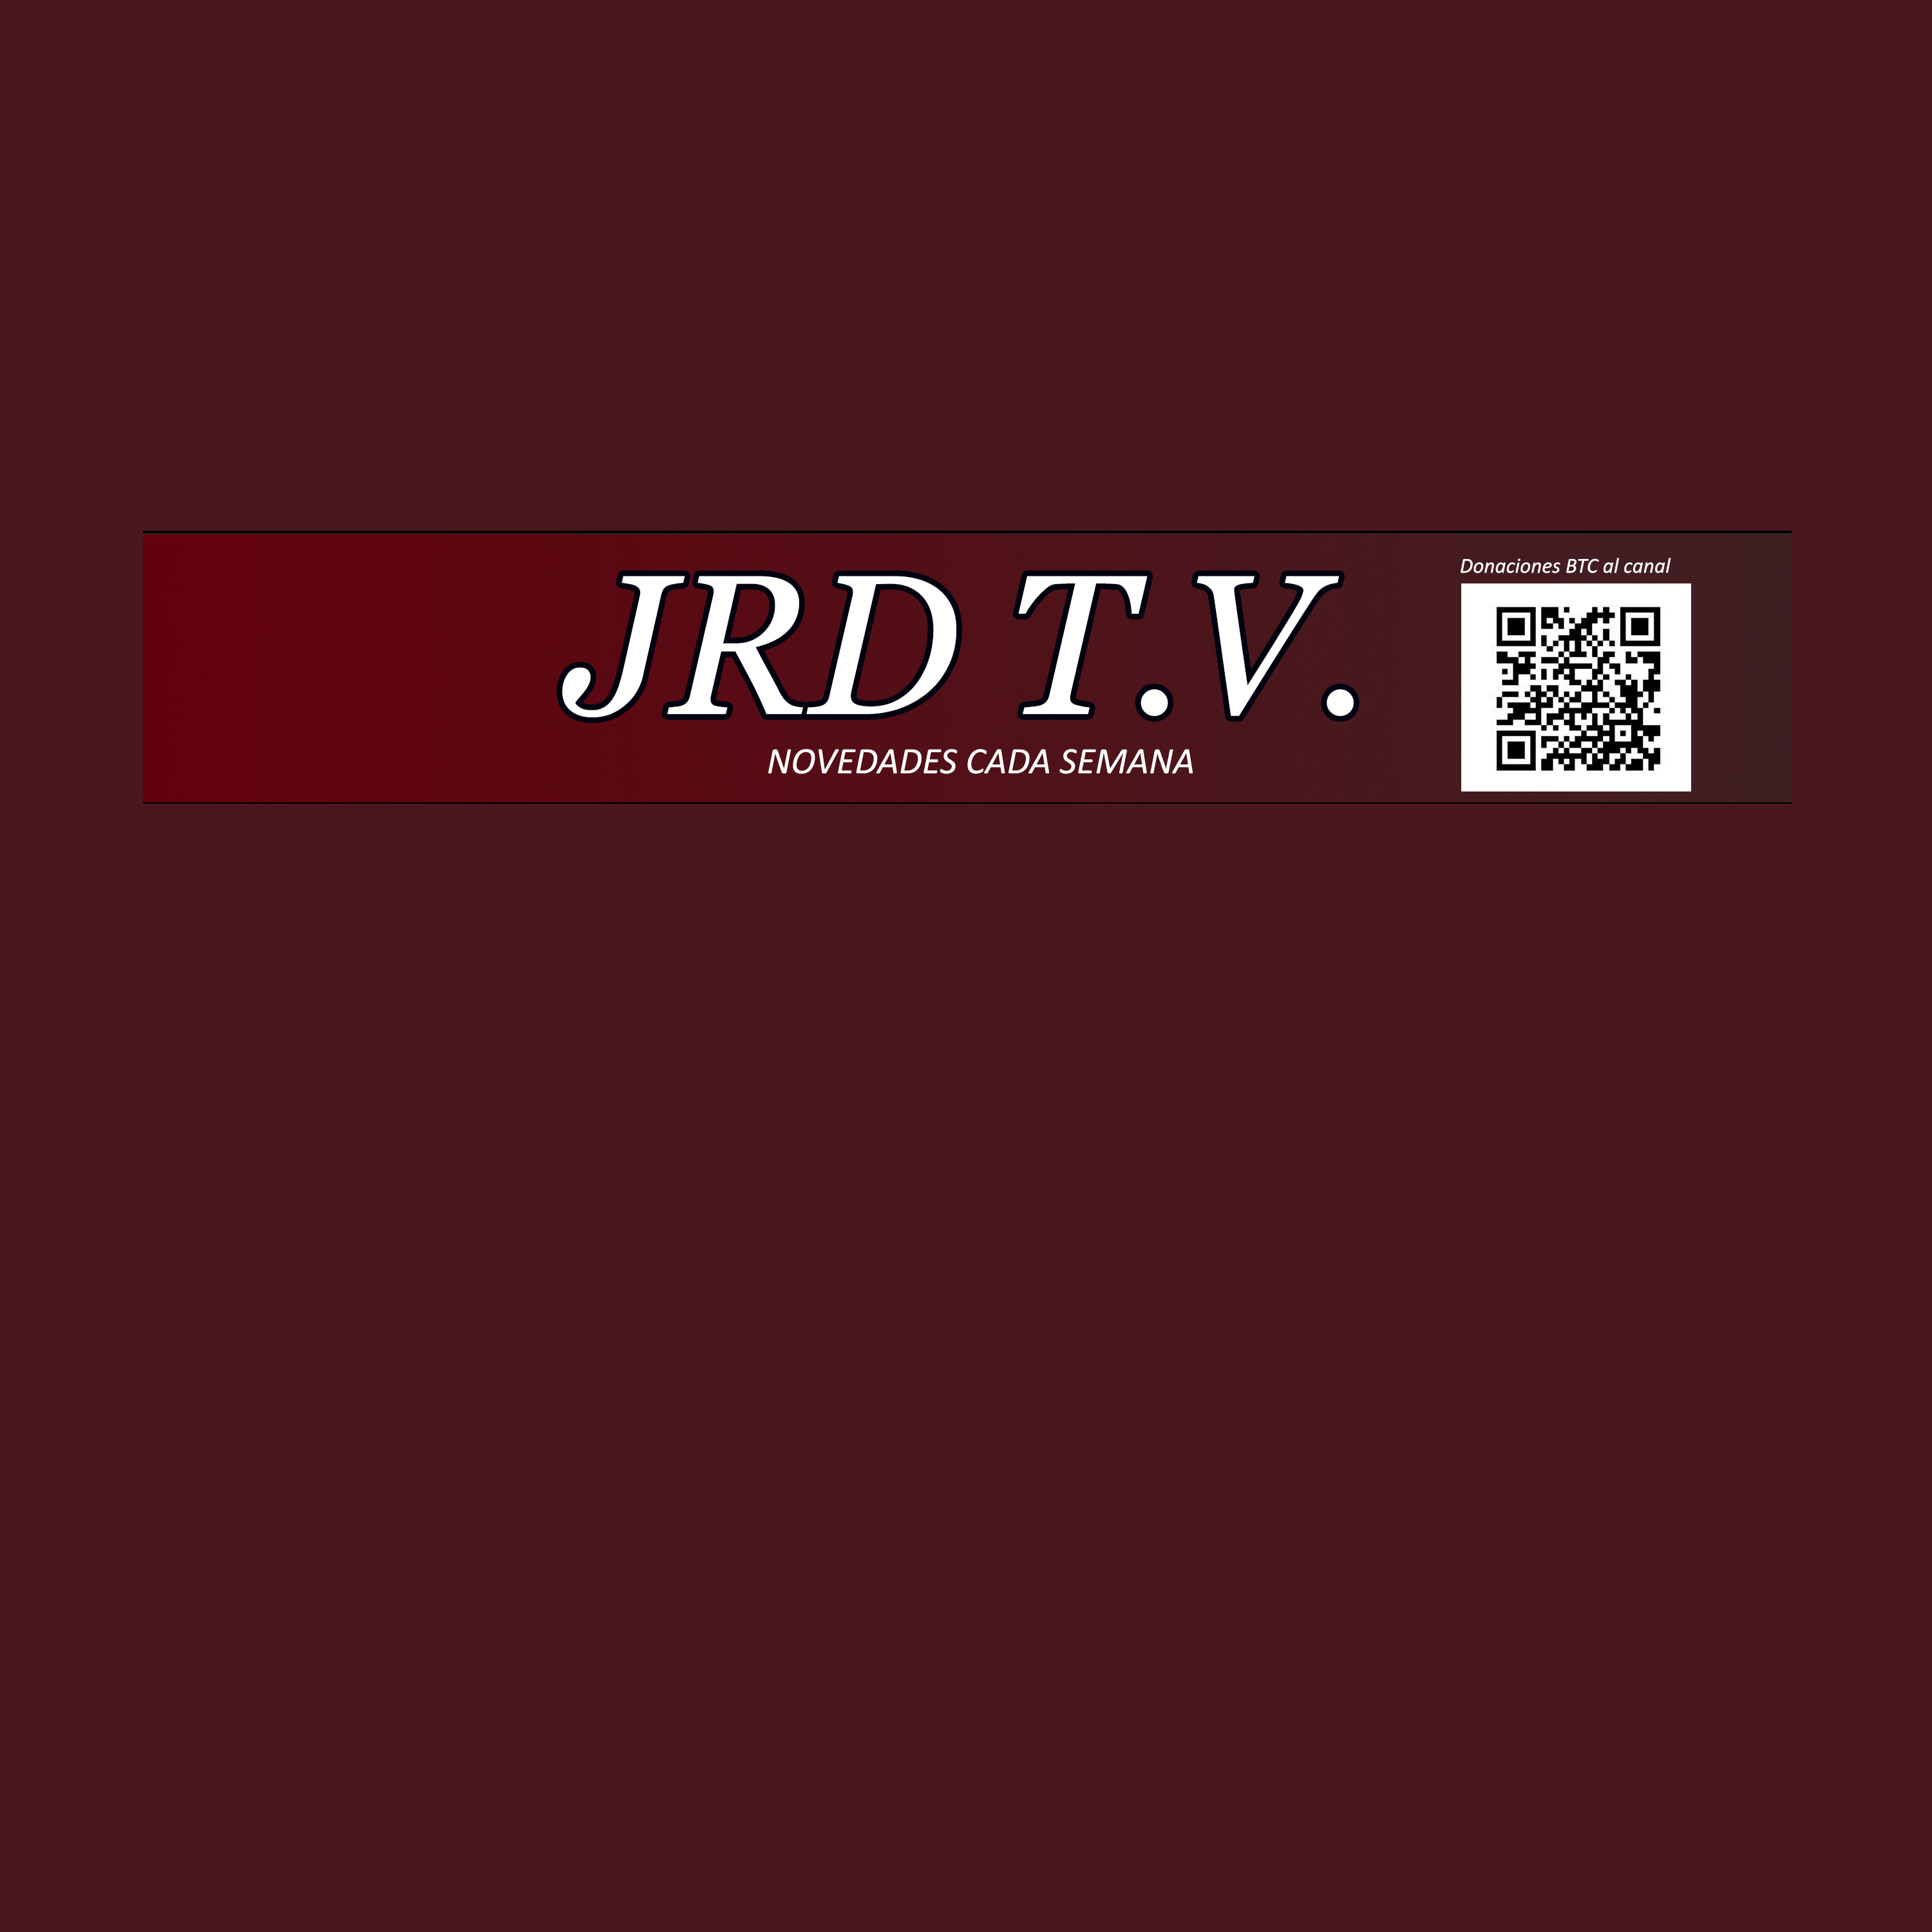 JRD TV cover